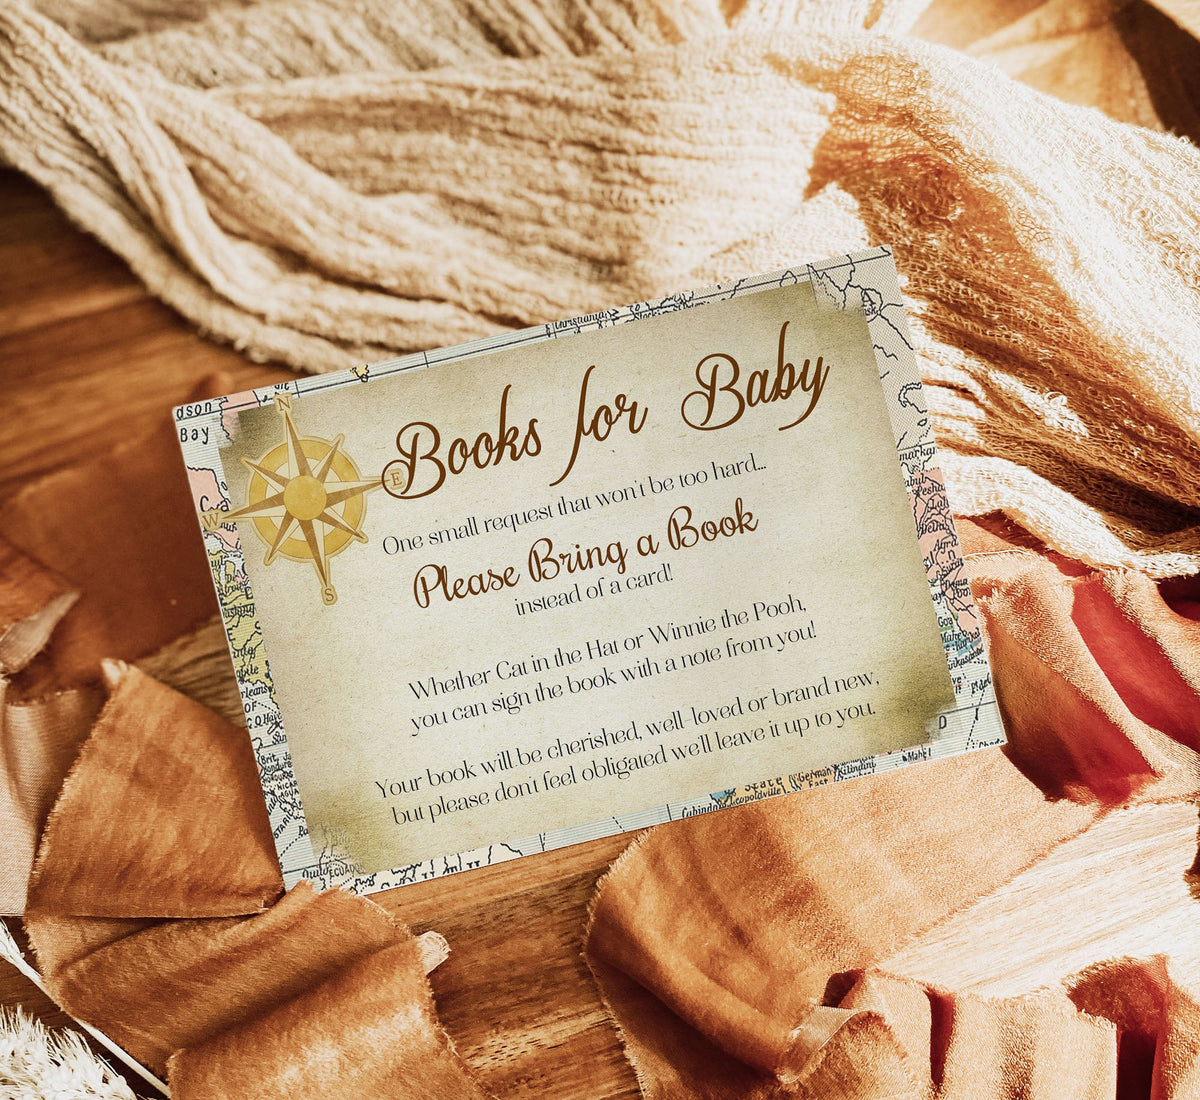 Adventure Books for Baby - Premium Paper & Party Supplies > Paper > Invitations & Announcements > Invitations from Sugar and Spice Invitations - Just $1.50! Shop now at Sugar and Spice Paper